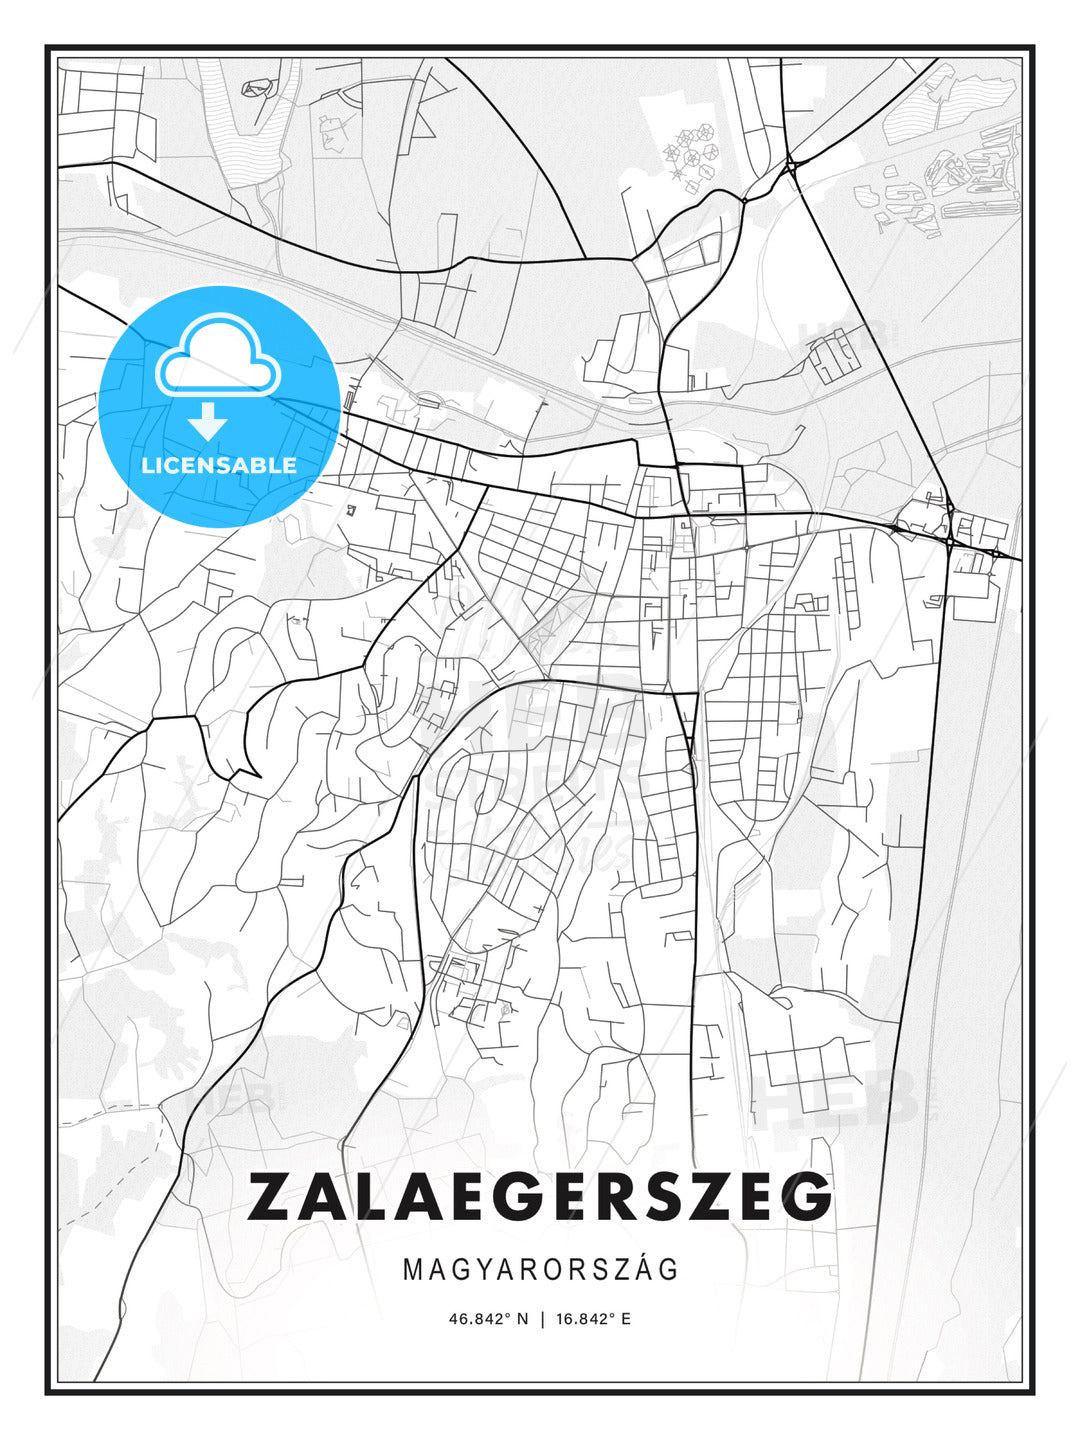 Zalaegerszeg, Hungary, Modern Print Template in Various Formats - HEBSTREITS Sketches